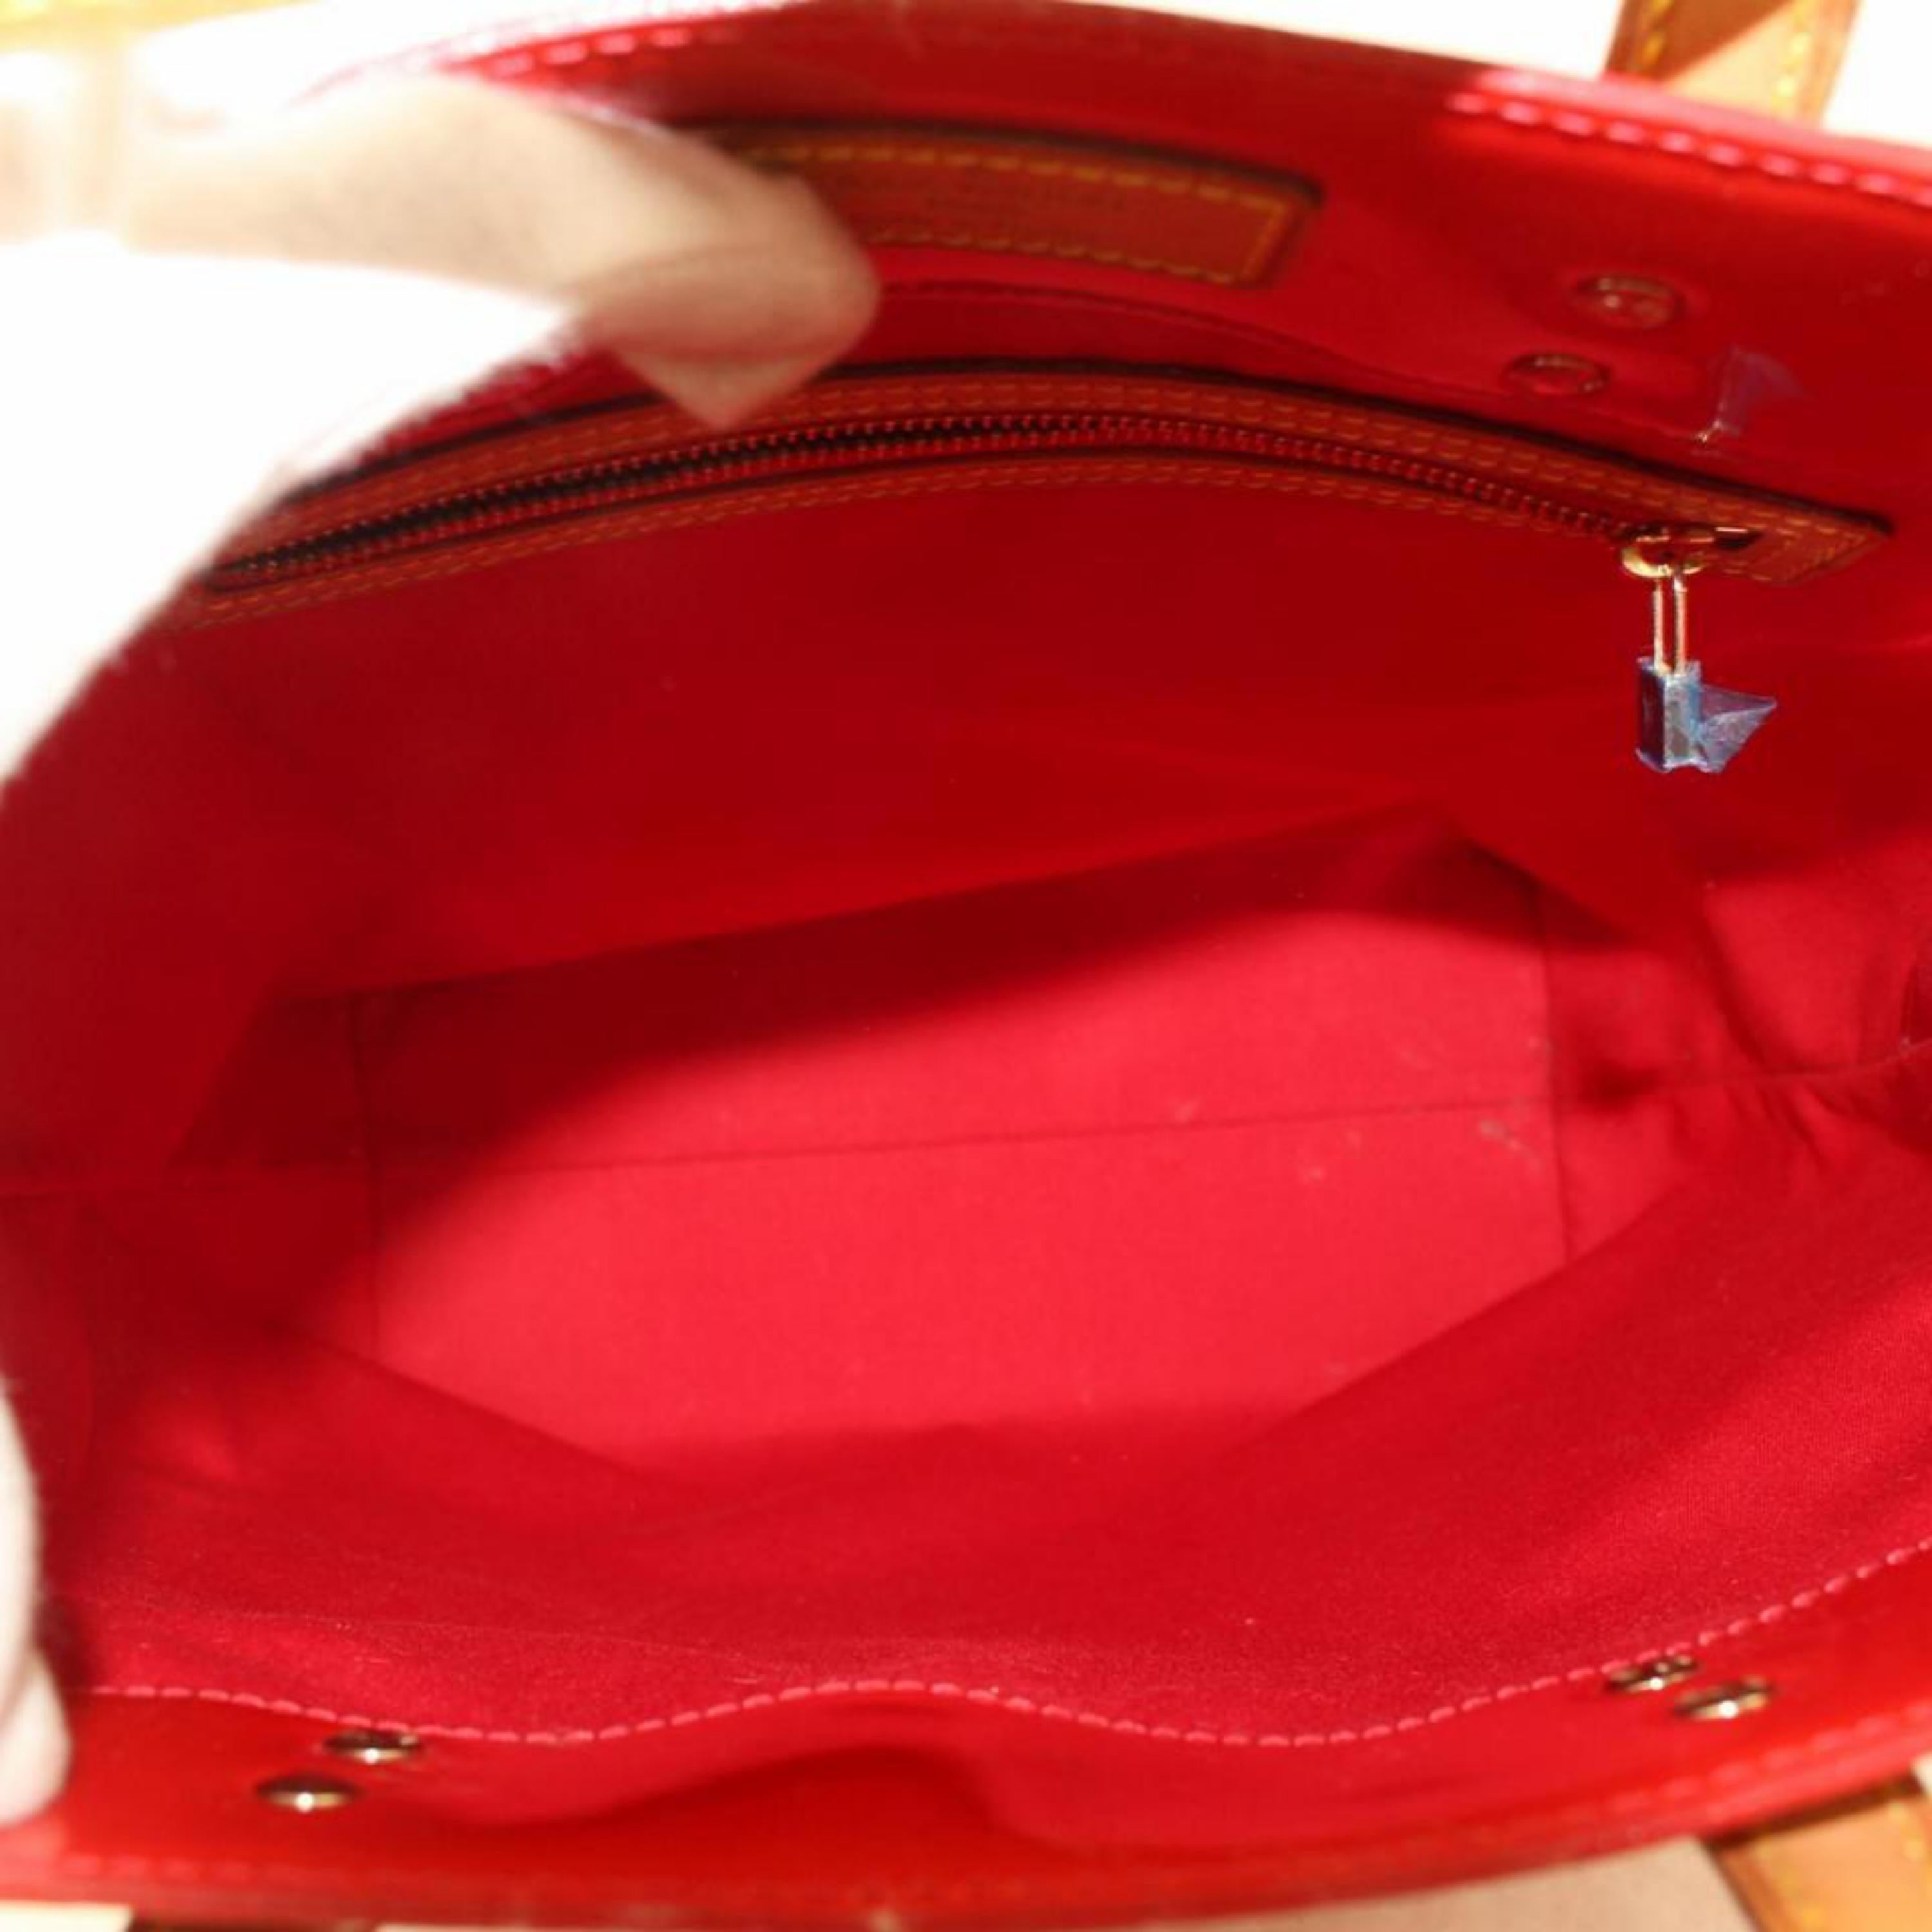 Louis Vuitton Reade Monogram Vernis Mm 869298 Red Patent Leather Tote In Good Condition For Sale In Forest Hills, NY